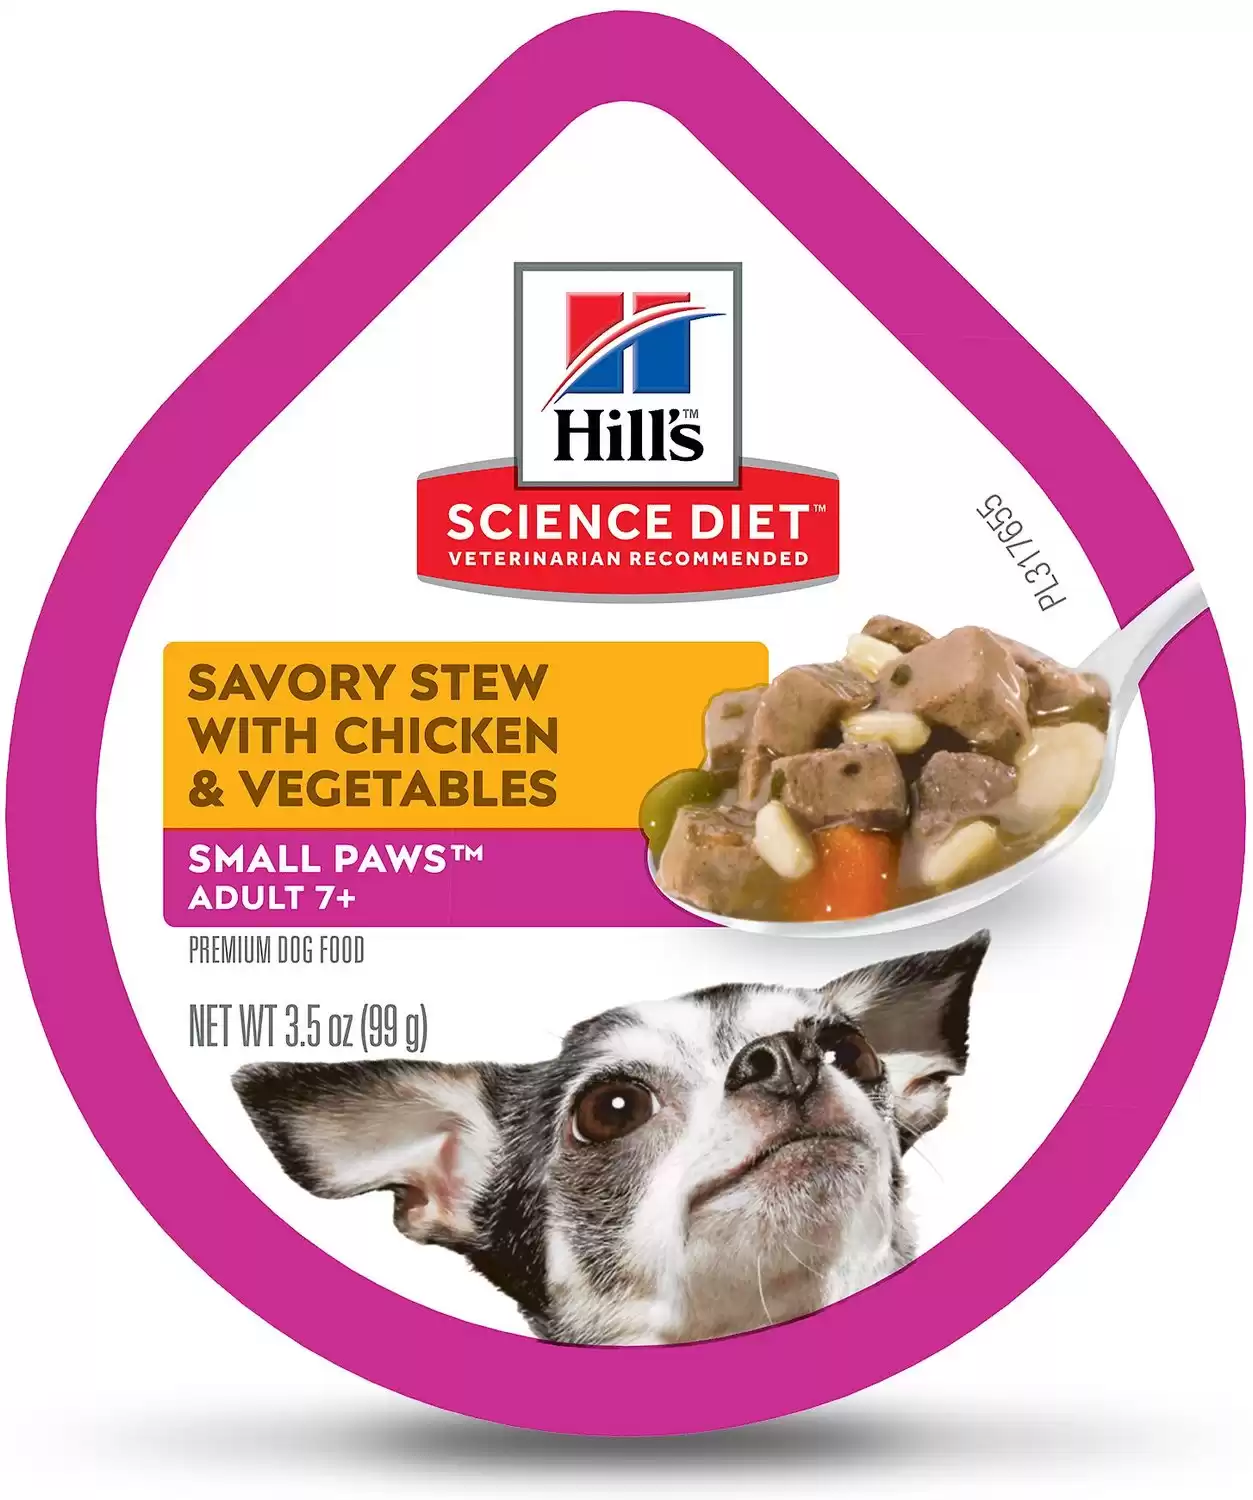 Hill’s Science Diet Adult 7+ Small Paws Dog Food